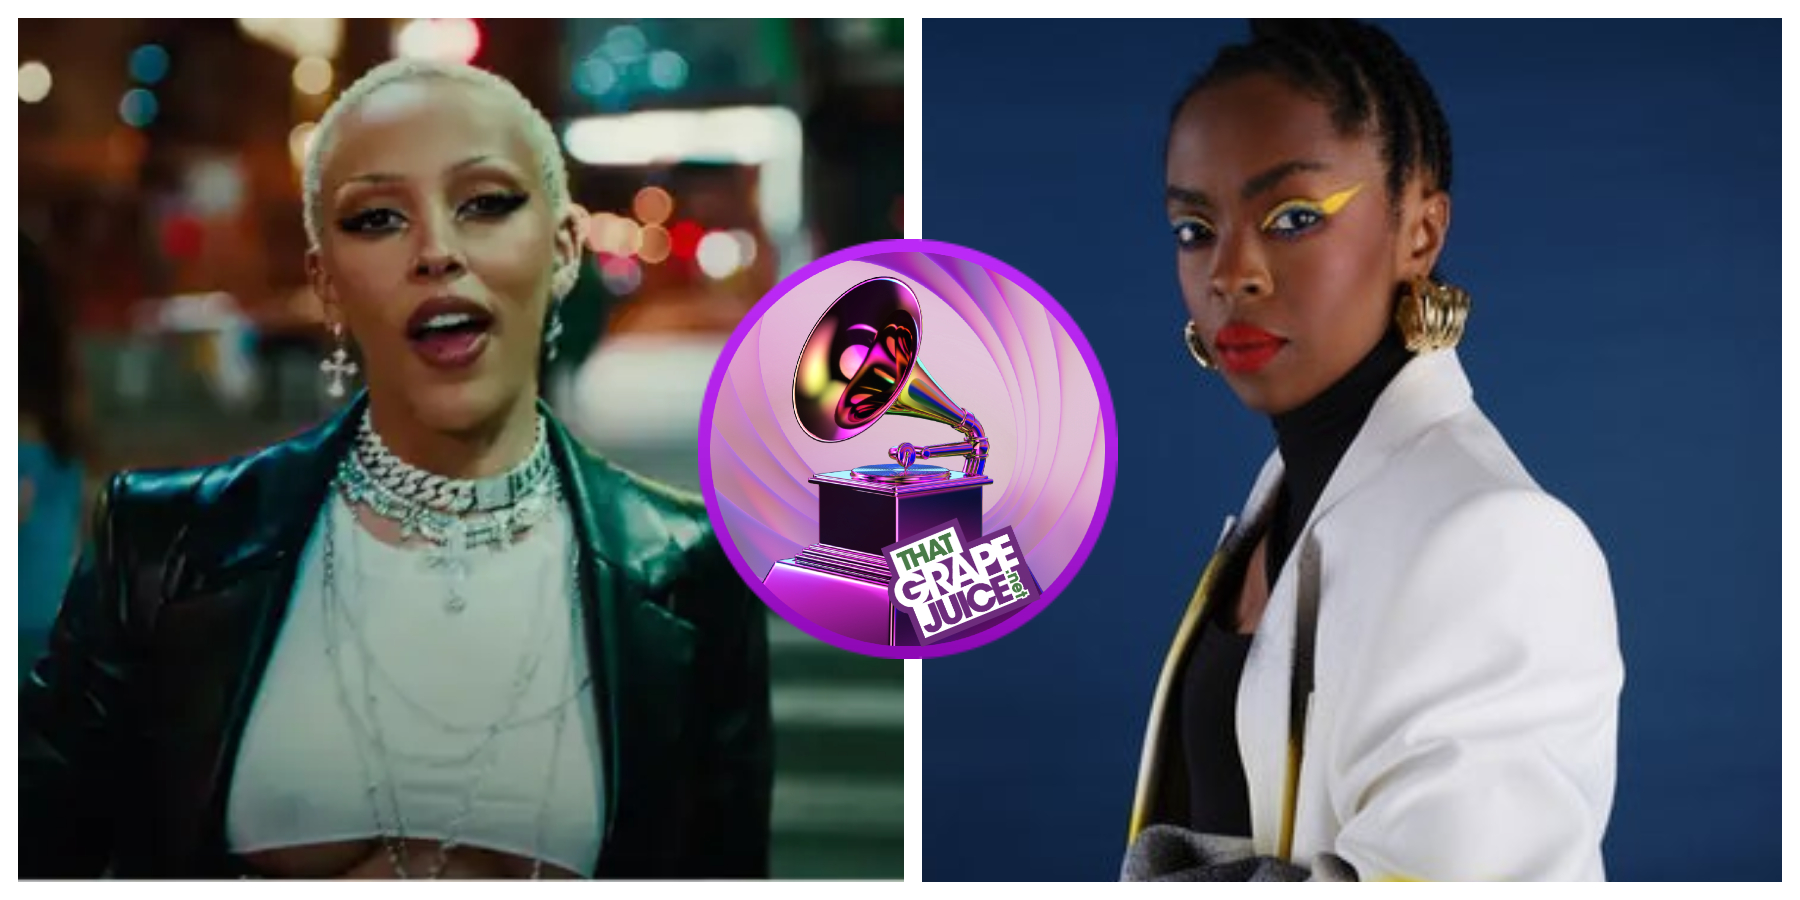 Doja Cat, the Most GRAMMY-Nominated Female Rapper of the Century, Ties Lauryn Hill on All-Time List Thanks to New Nods